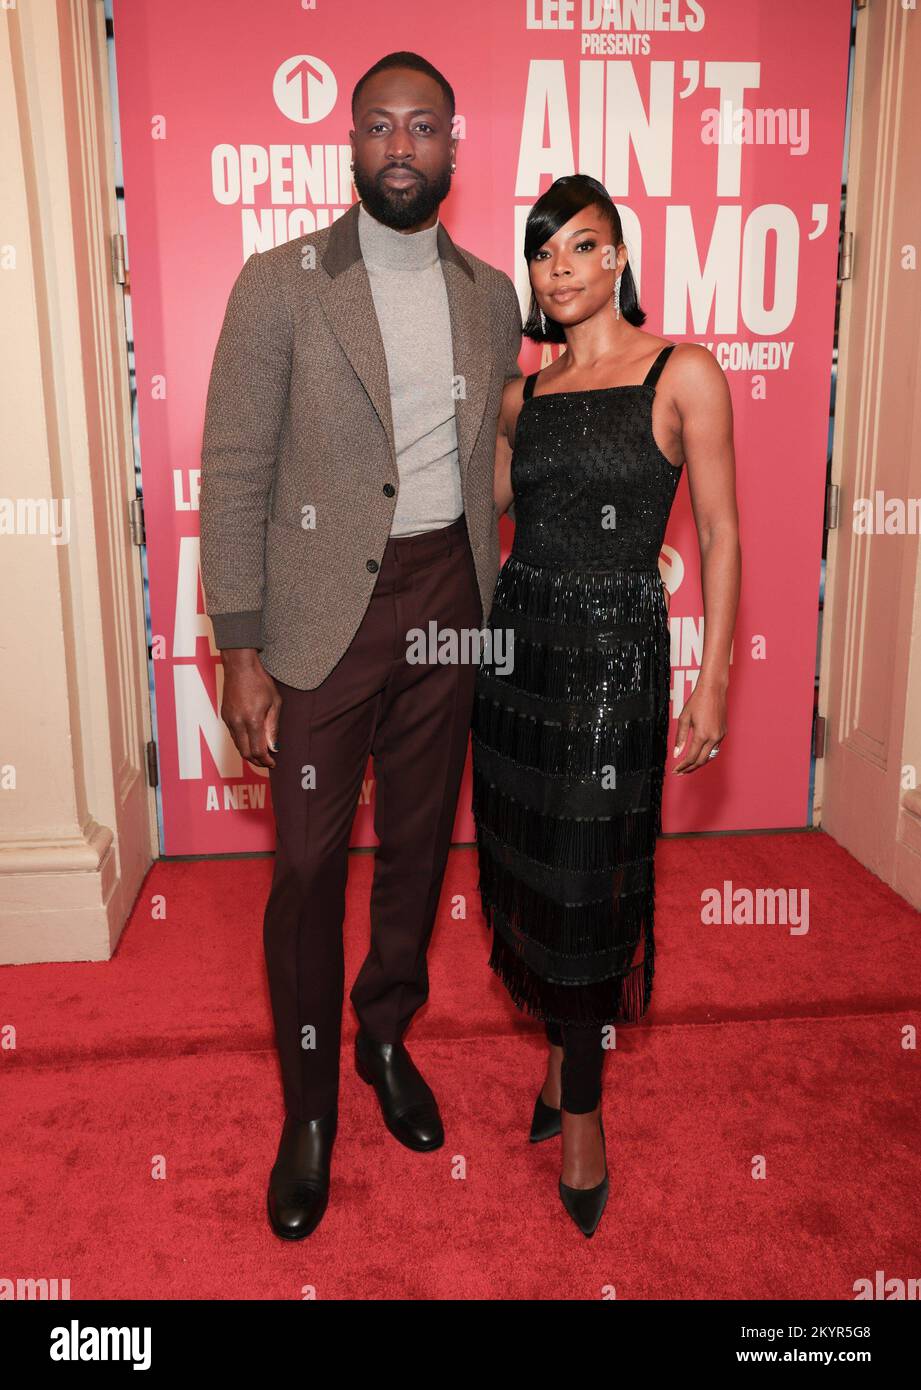 New York, NY, USA. 1st Dec, 2022. Dwayne Wade, Gabrielle Union at arrivals for AIN'T NO MO' Opening Night on Broadway, Belasco Theatre, New York, NY December 1, 2022. Credit: CJ Rivera/Everett Collection/Alamy Live News Stock Photo